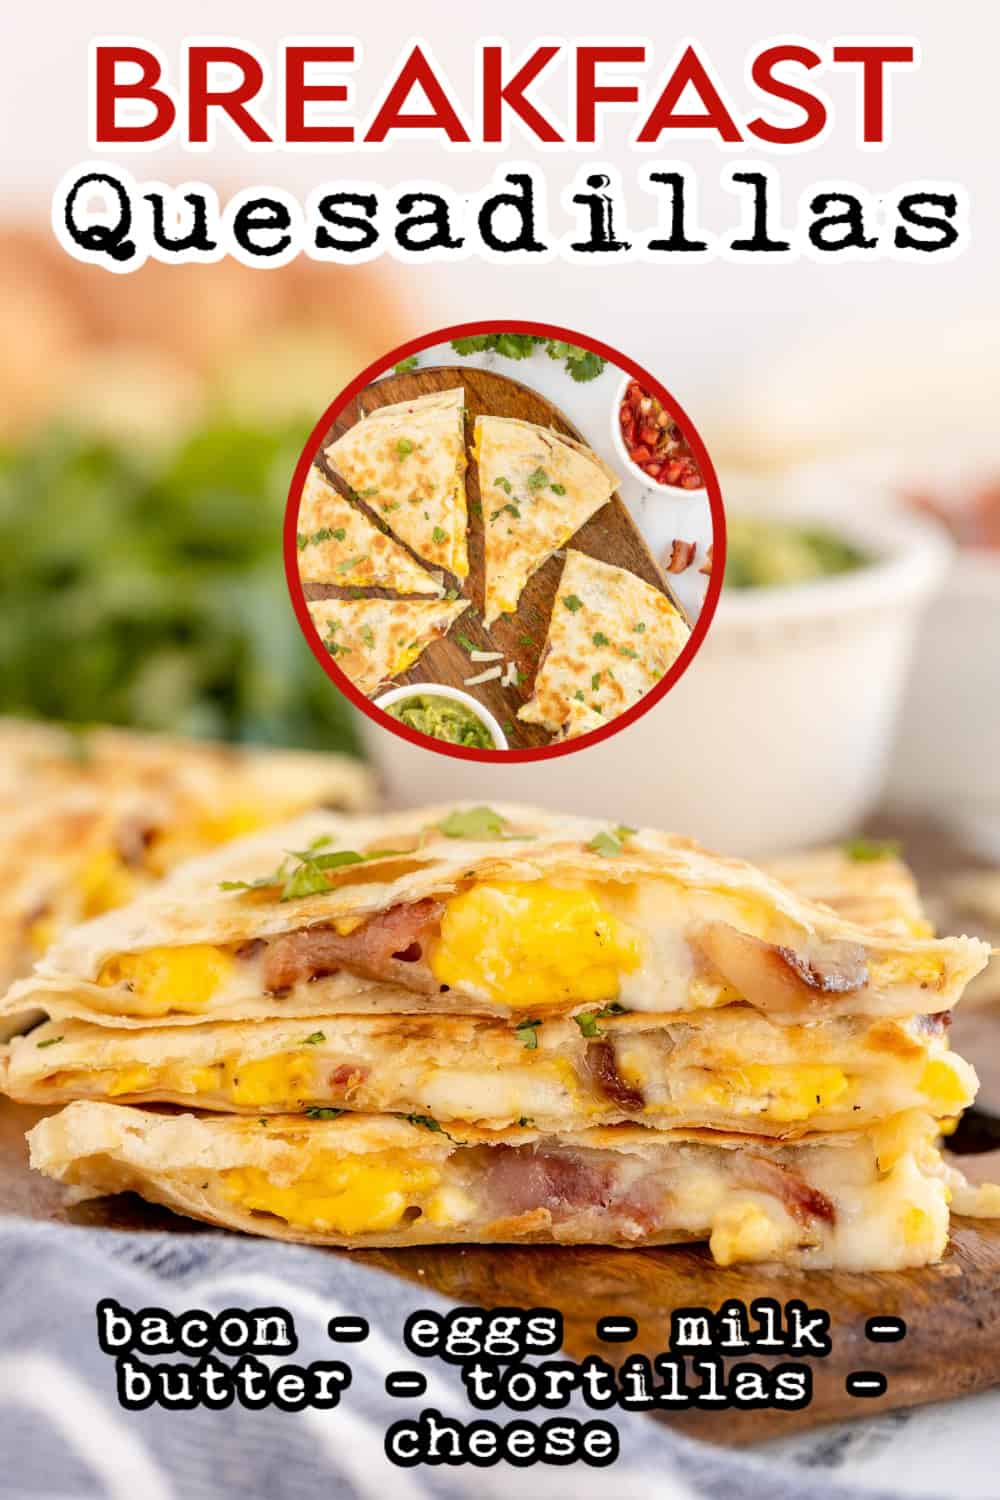 Breakfast quesadillas in a stack with recipe name and ingredients overlaid in text.